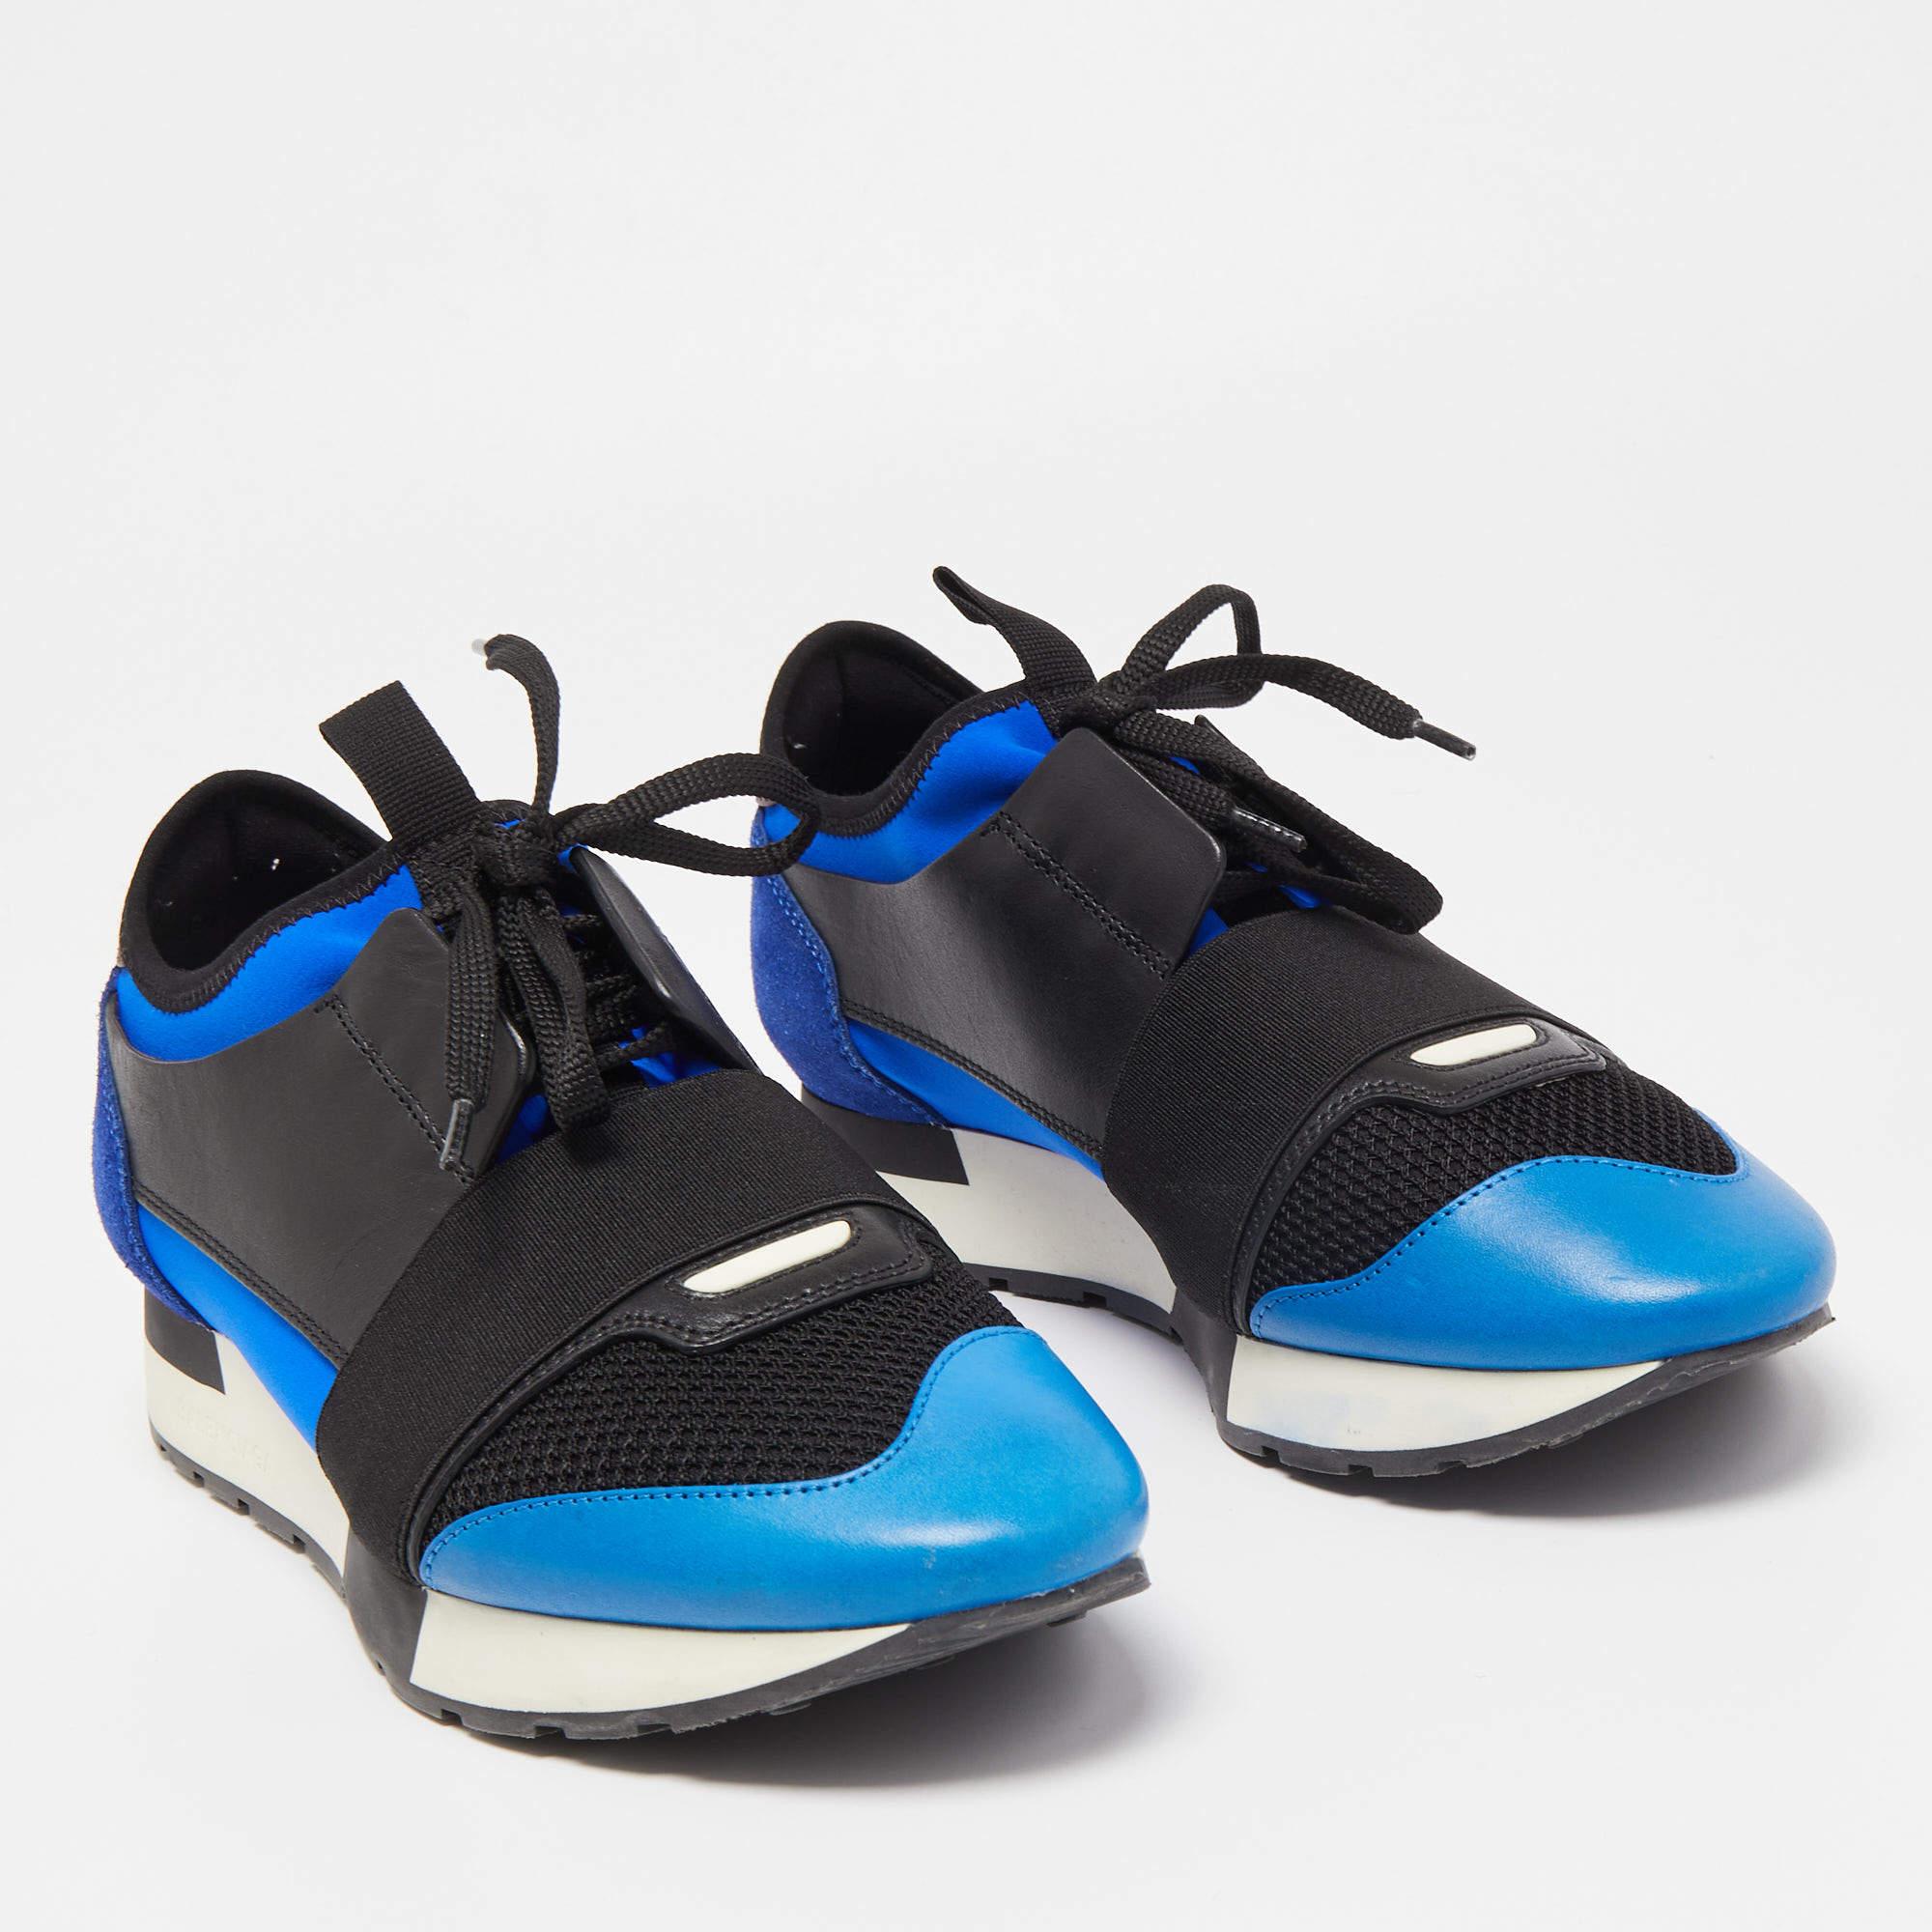 Balenciaga Black/Blue Leathe and Mesh Race Runner Low Sneakers In Excellent Condition For Sale In Dubai, Al Qouz 2